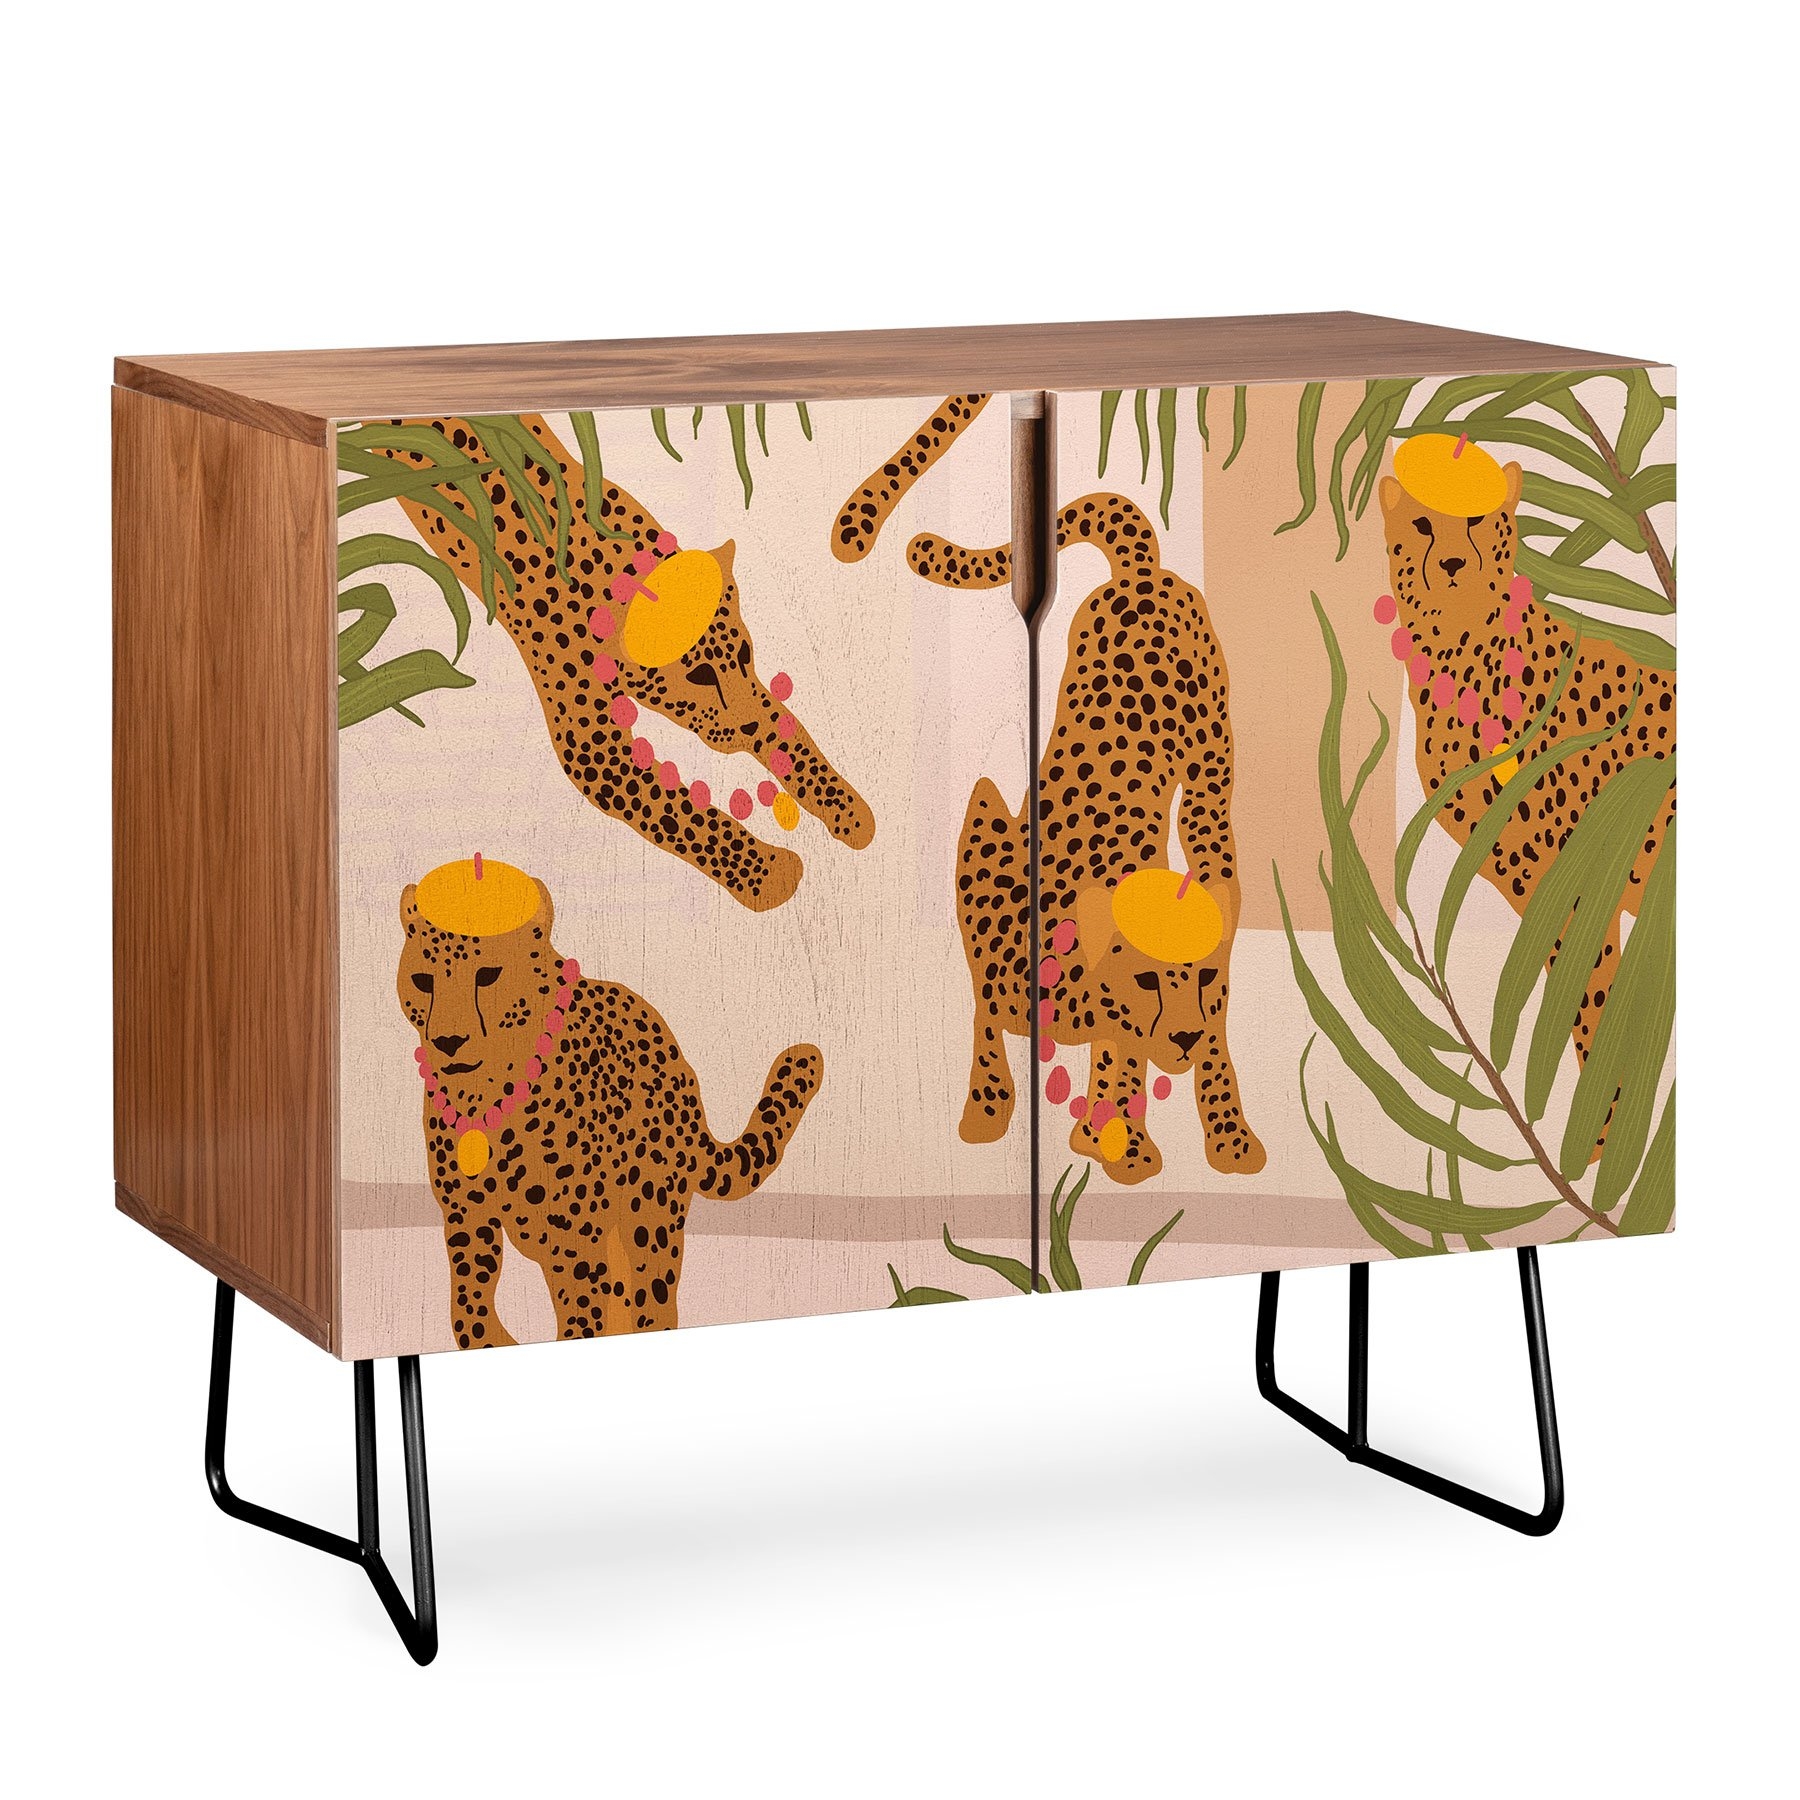 Iveta Abolina Come Play with Me Credenza - Birch / Gold - Image 2